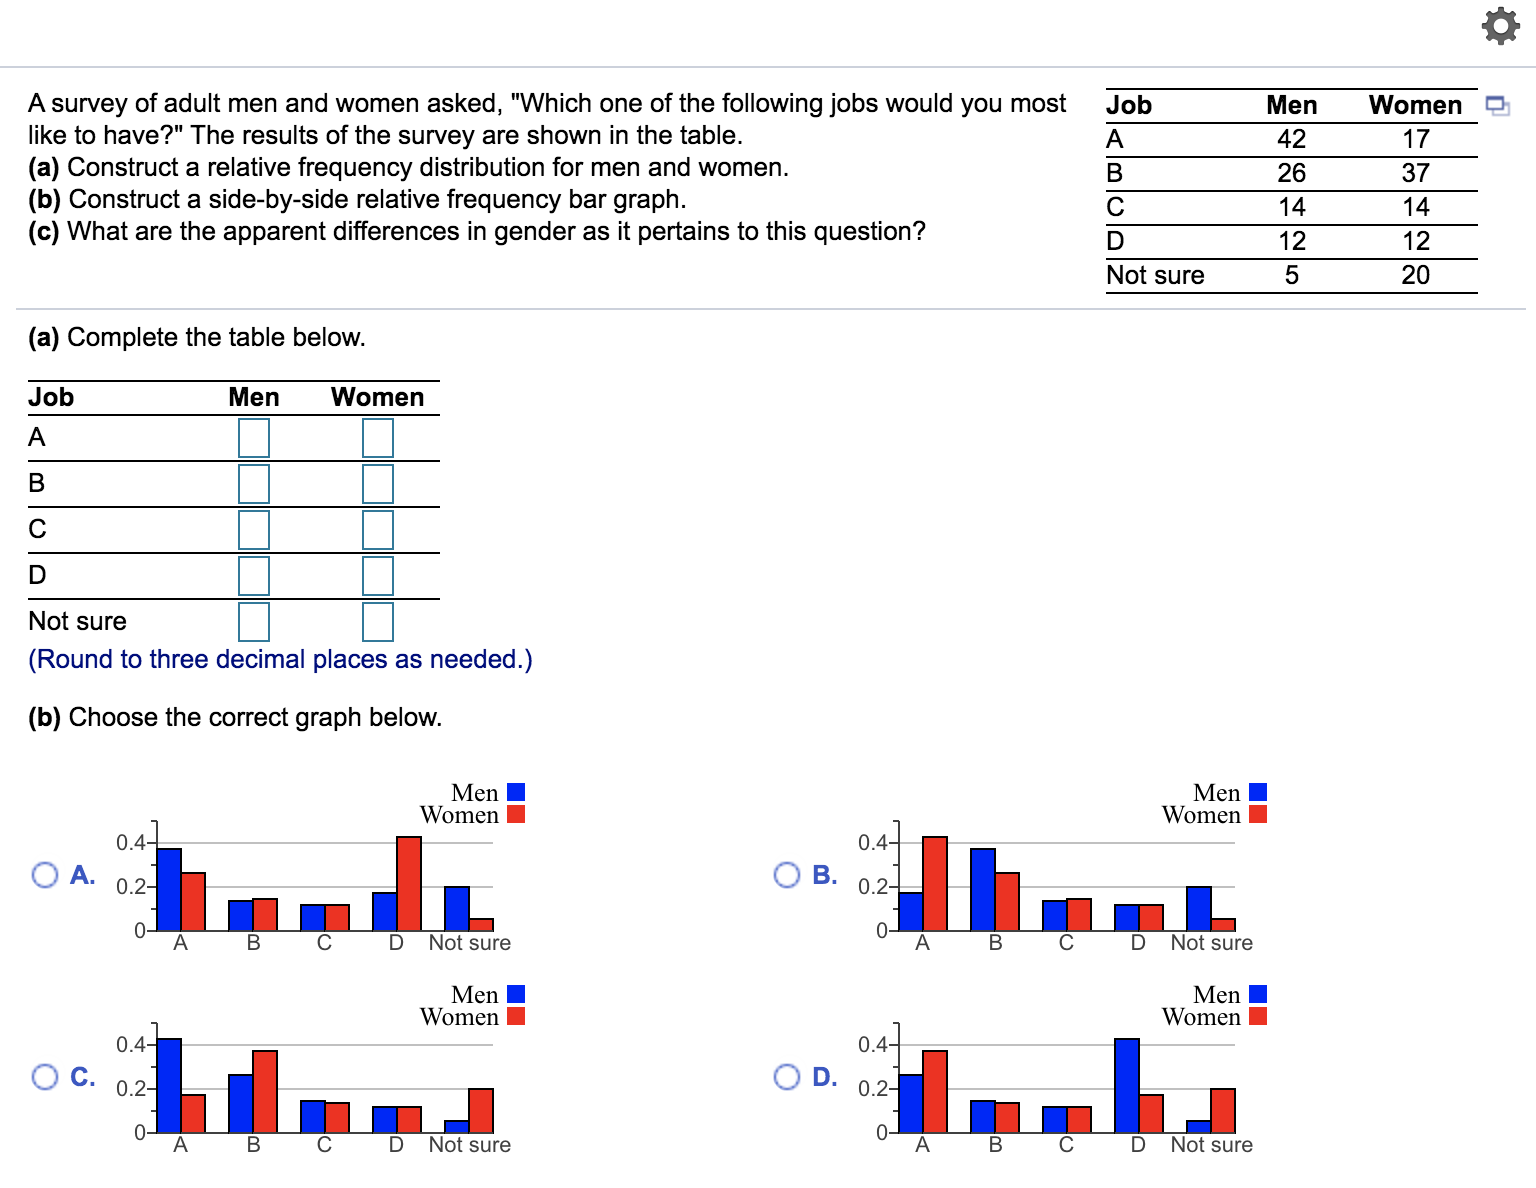 A survey of adult men and women asked, "Which one of the following jobs would you most
like to have?" The results of the survey are shown in the table.
(a) Construct a relative frequency distribution for men and women.
(b) Construct a side-by-side relative frequency bar graph.
(c) What are the apparent differences in gender as it pertains to this question?
Job
Men
Women
A
42
17
26
37
C
14
14
12
12
Not sure
20
(a) Complete the table below.
Job
Men
Women
A
B
C
Not sure
(Round to three decimal places as needed.)
(b) Choose the correct graph below.
Men
Women
Men
Women
0.41
O A.
0.4-
0.2-
В.
0.2-
0-
A
В
Not sure
0-
A
В
Not sure
Men
Women
Men
Women
0.4-
0.4-
Oc.
0.2-
D.
0.2-
0-
A
B
Not sure
0-
A
Not sure
